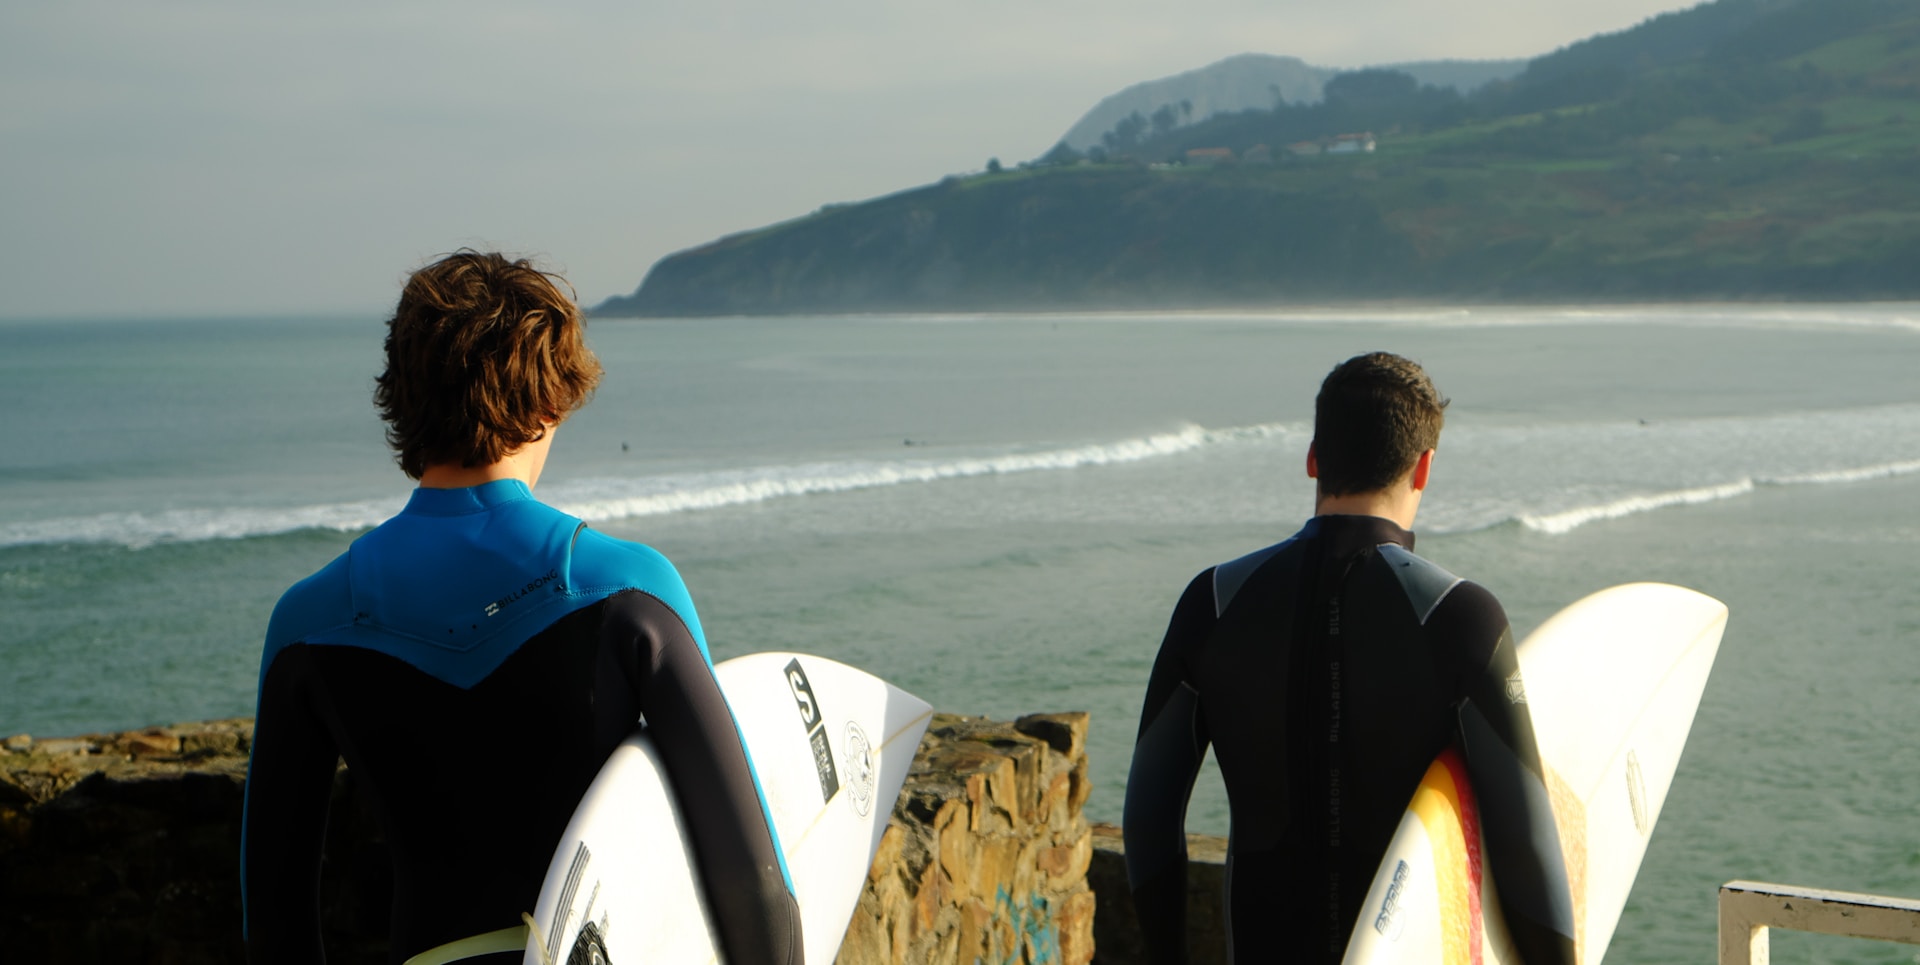 photo - two surfers walking to ride ways in a scenic location with ocean and green mountains in Hawaii